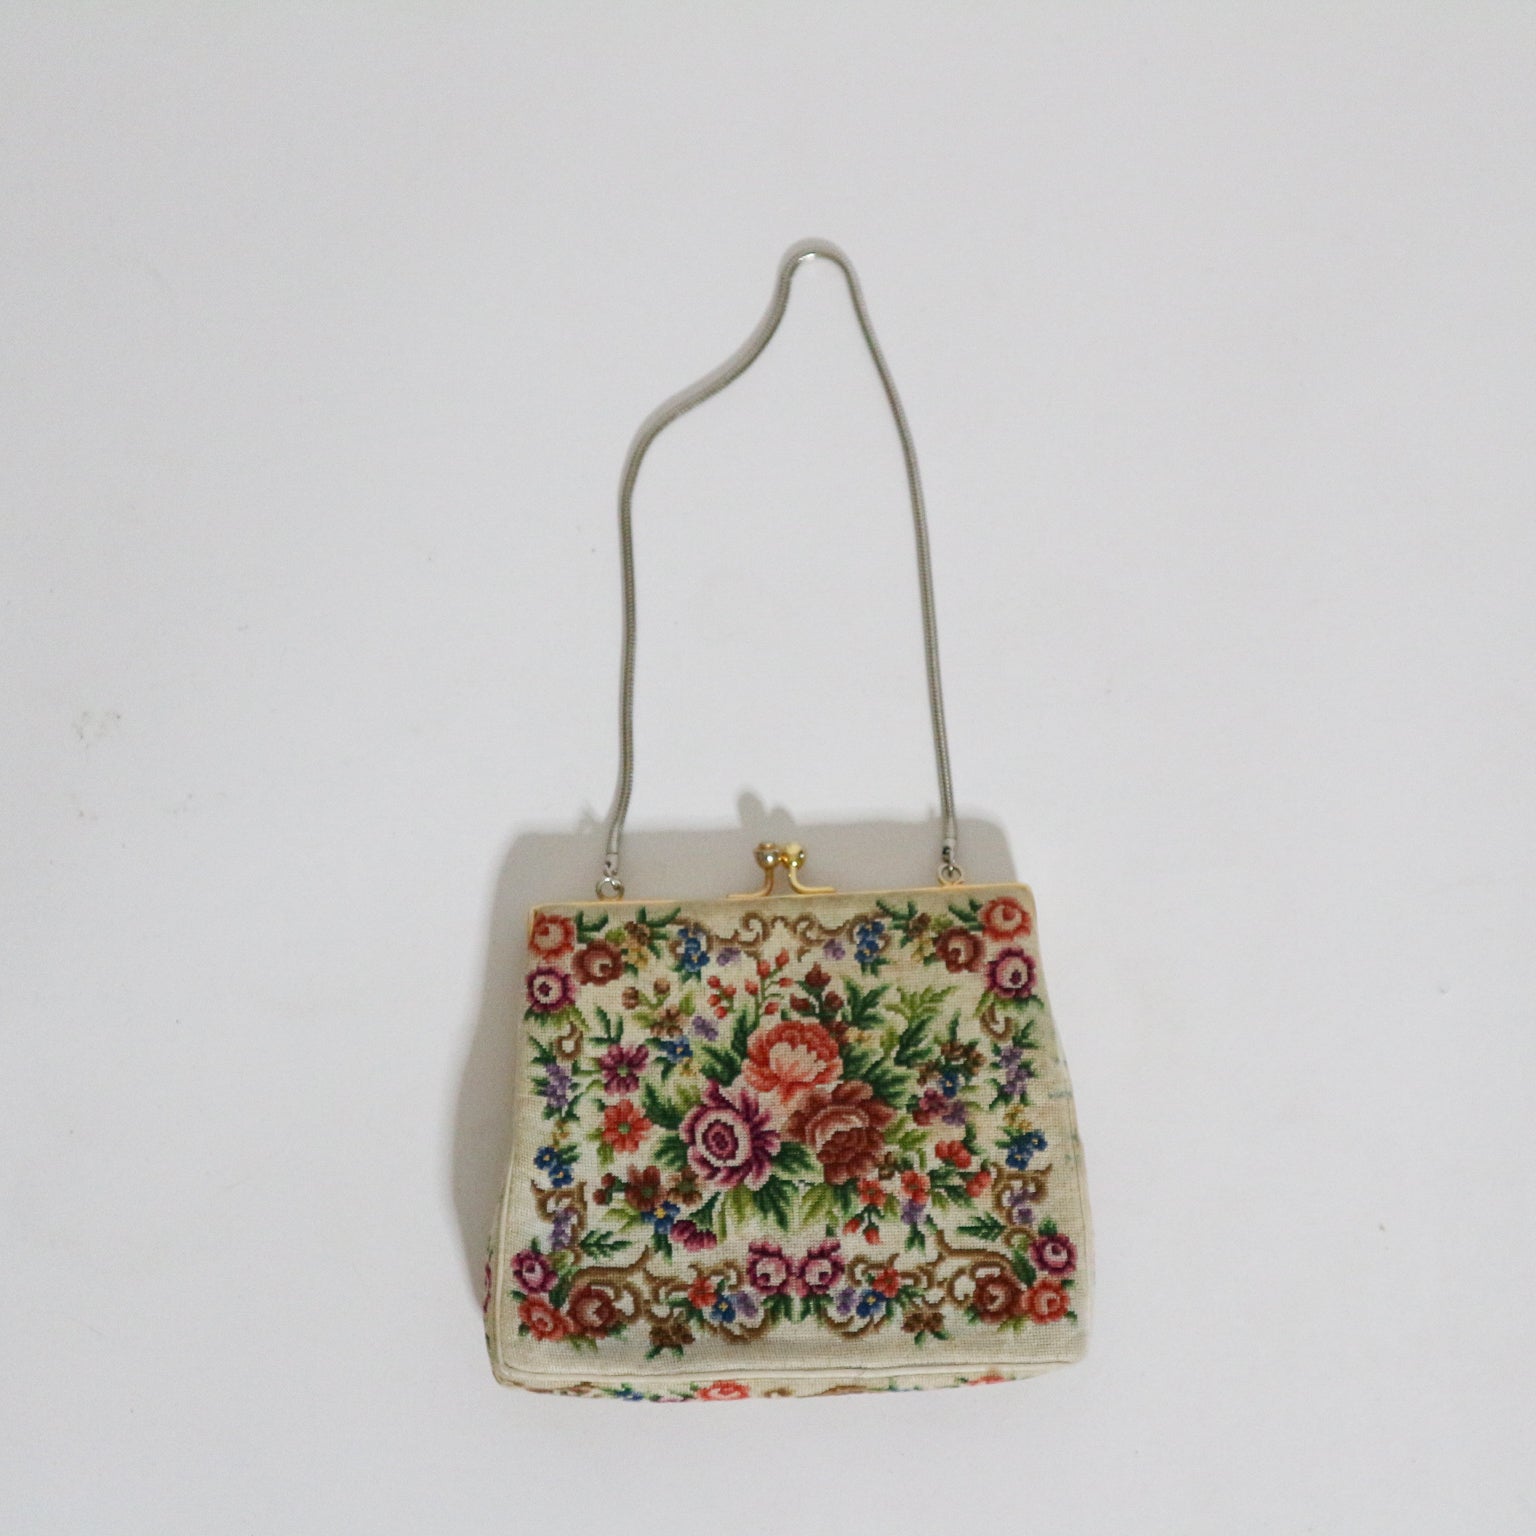 Vintage Embroidered Small Purse